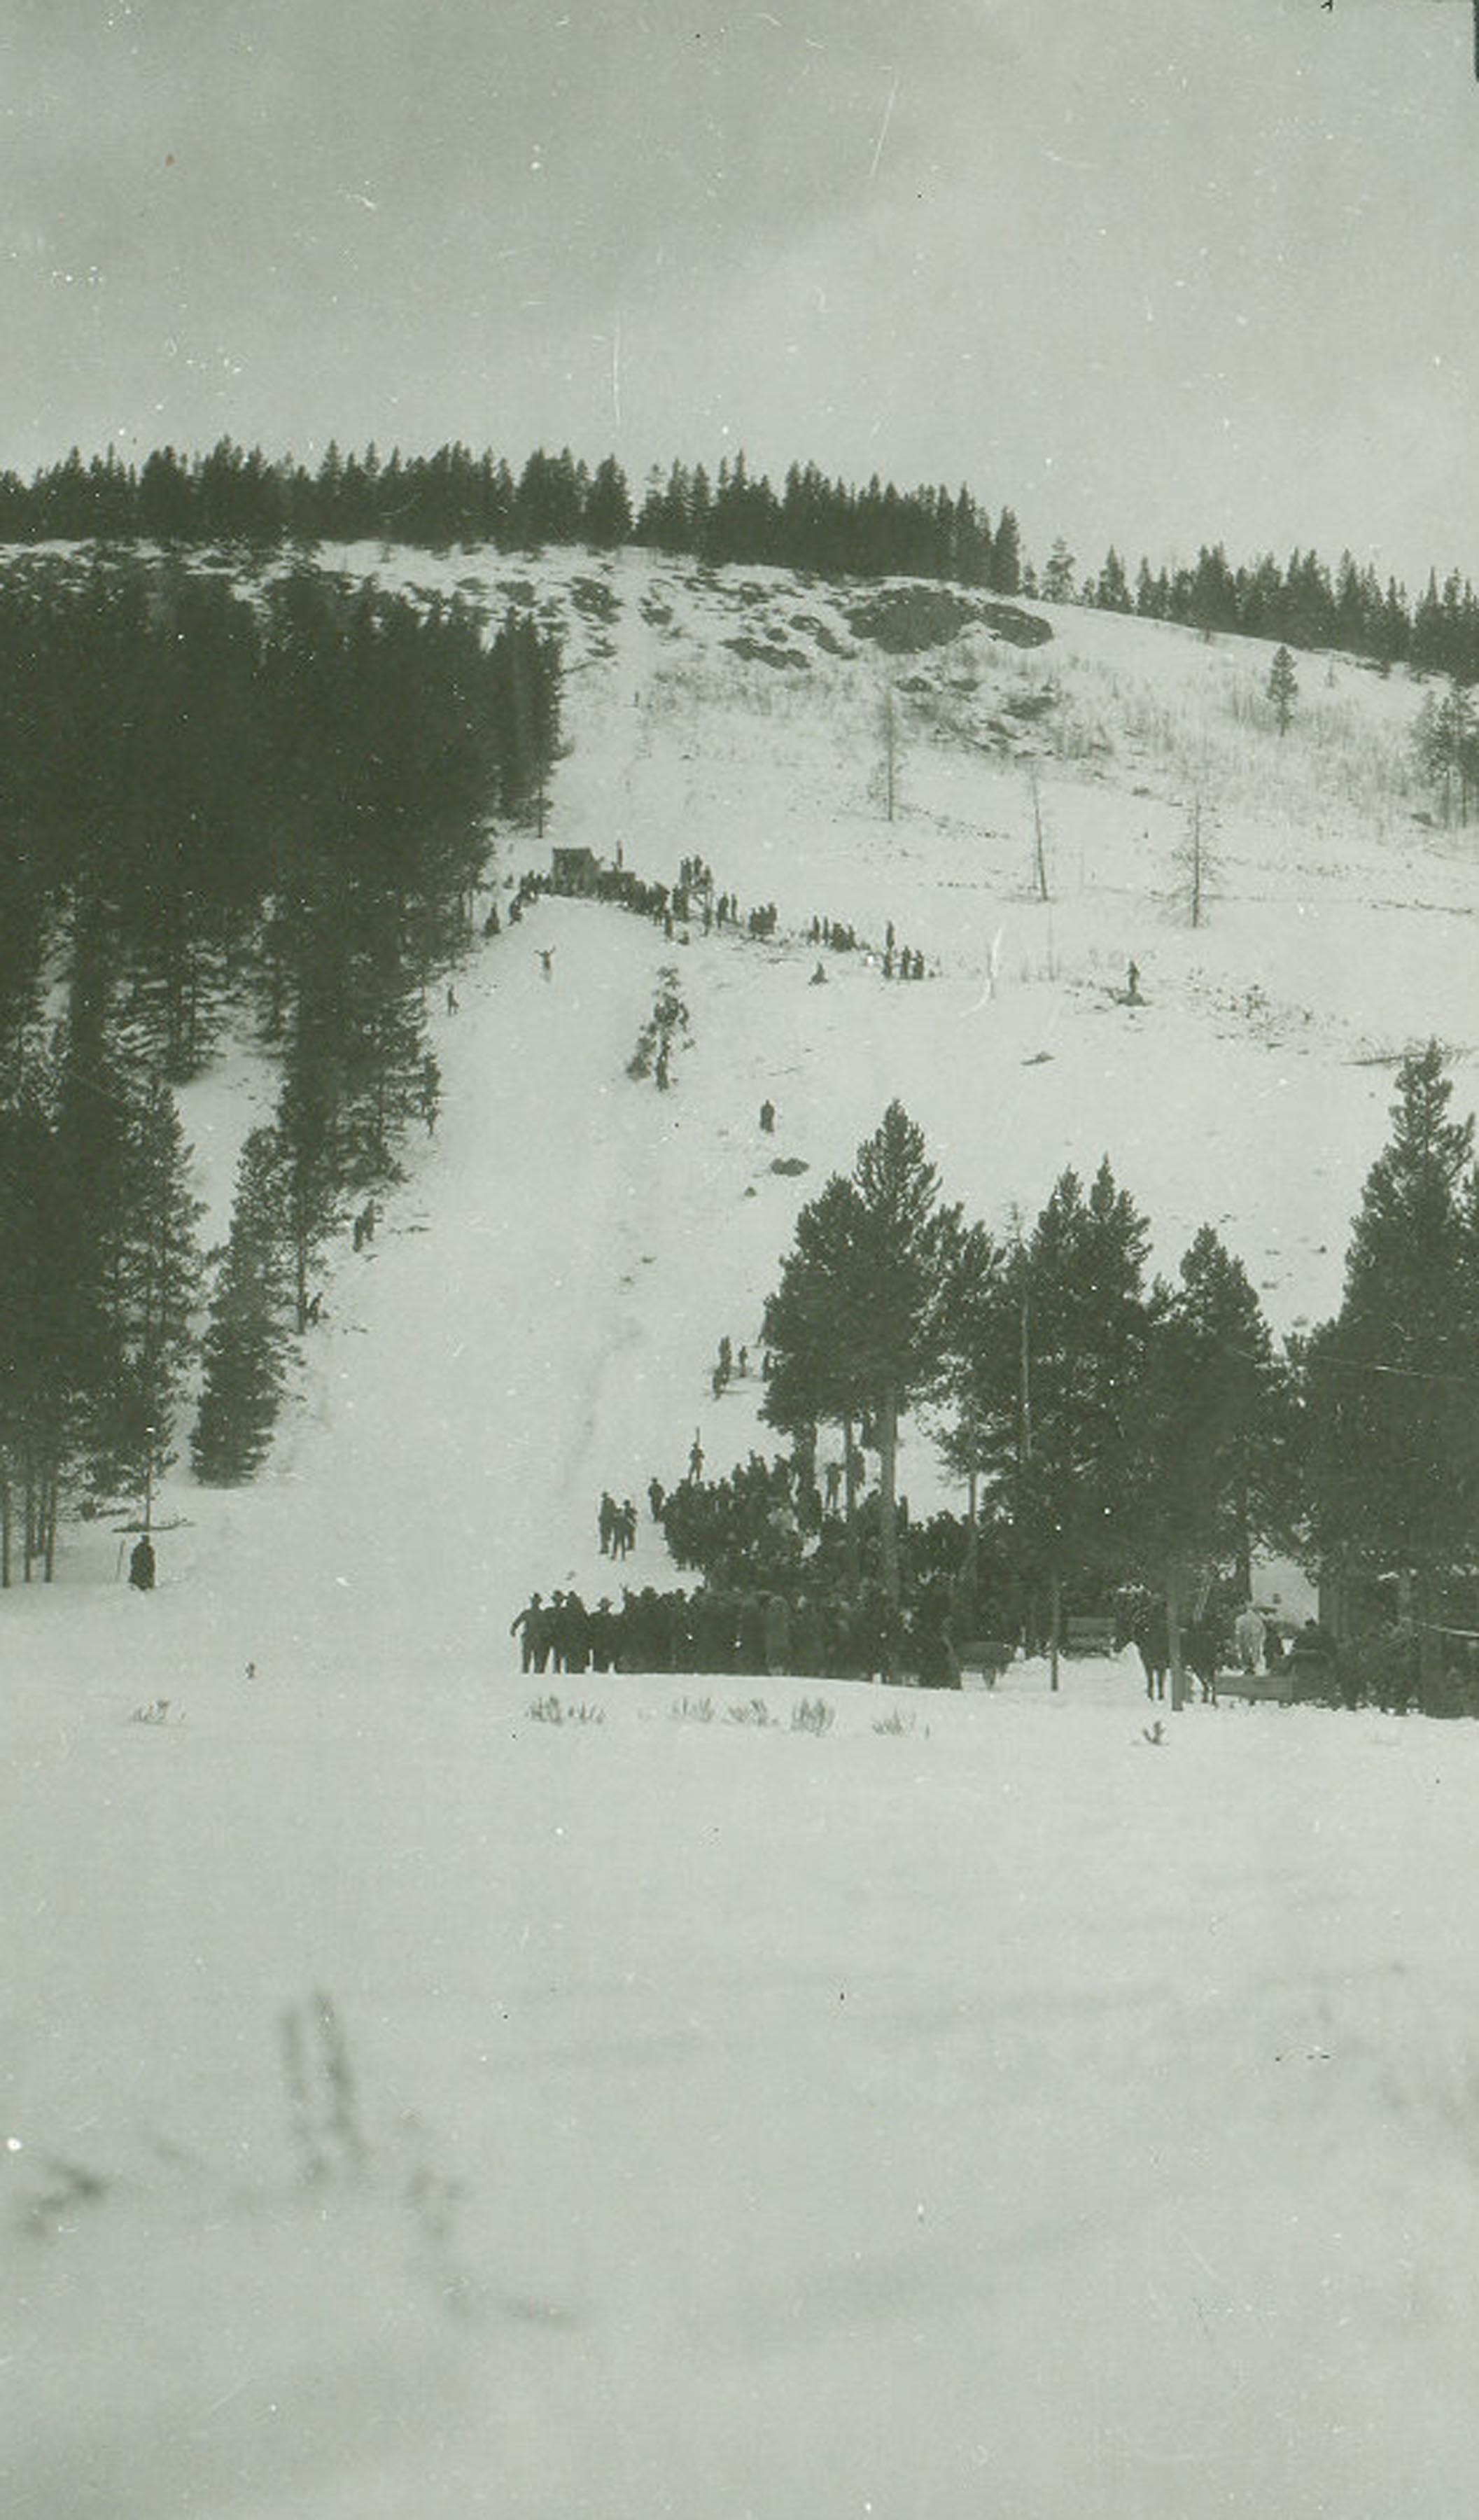 Spectators watch Anders Haugen make a jump at the Prestrud Jump, also called Haugen's Hill, at Dillon in 1919 or 1920. 